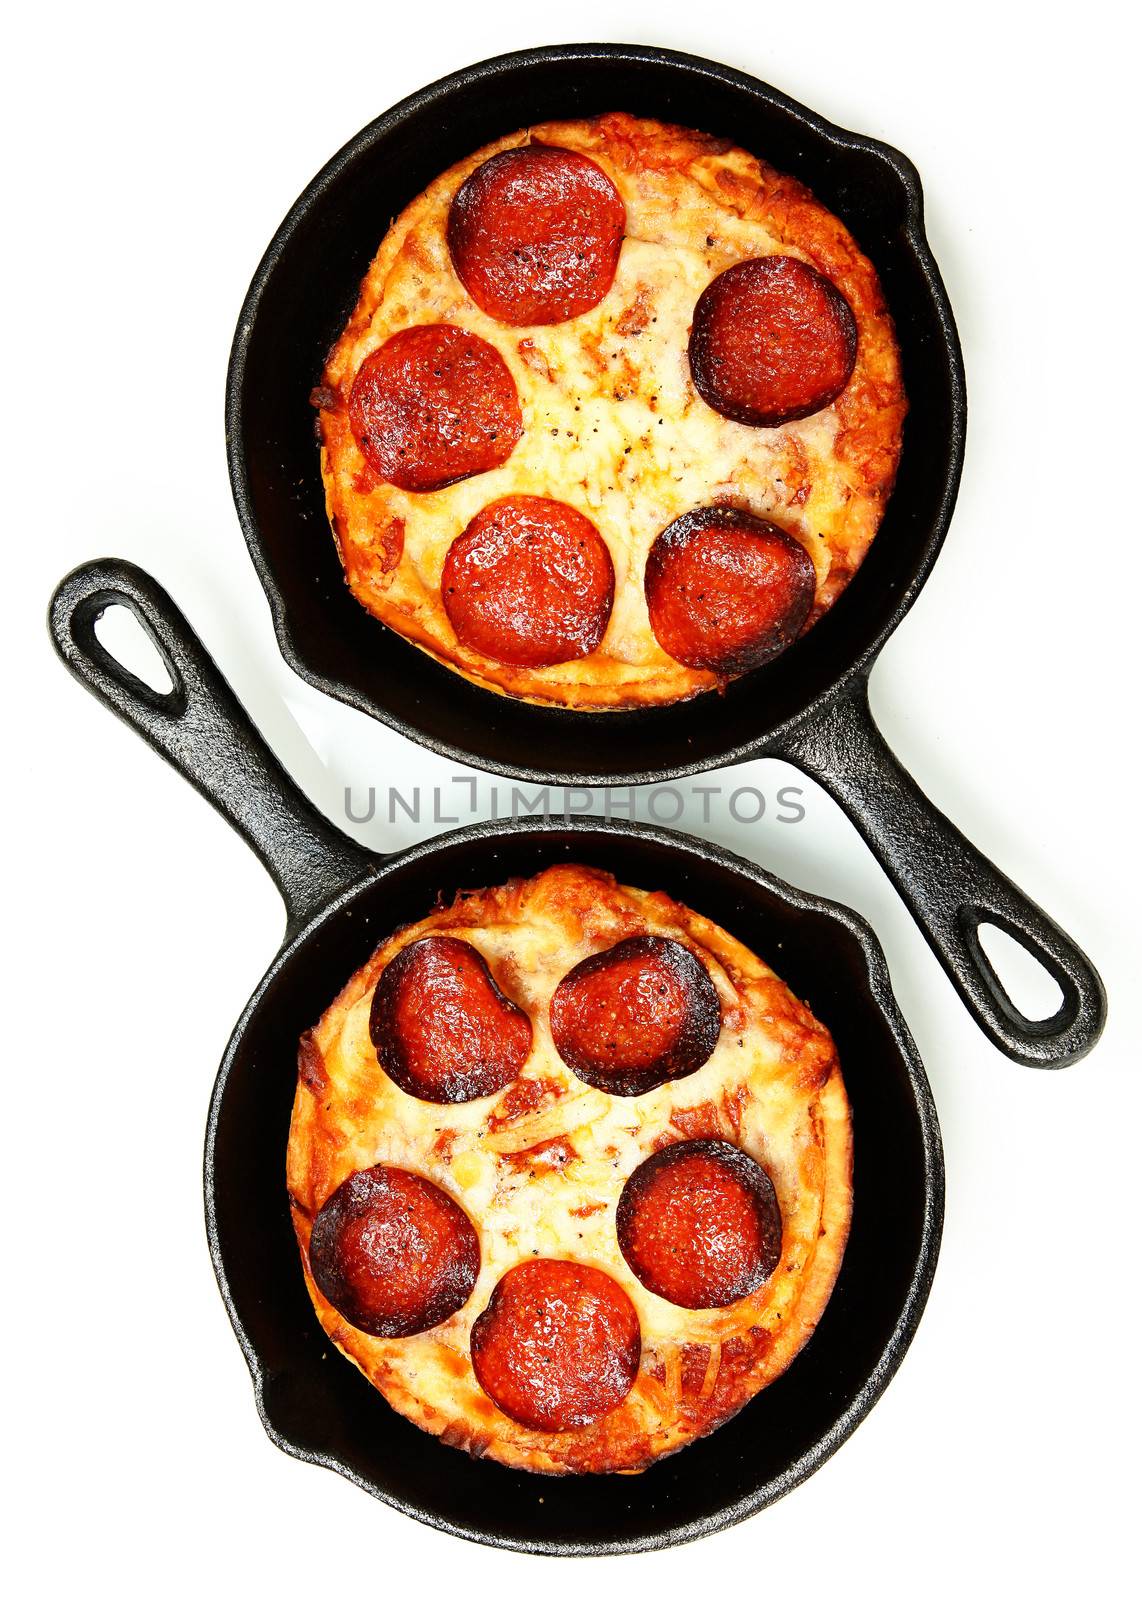 Two Single Serve Skillet Peperonni Pizzas Over White by duplass